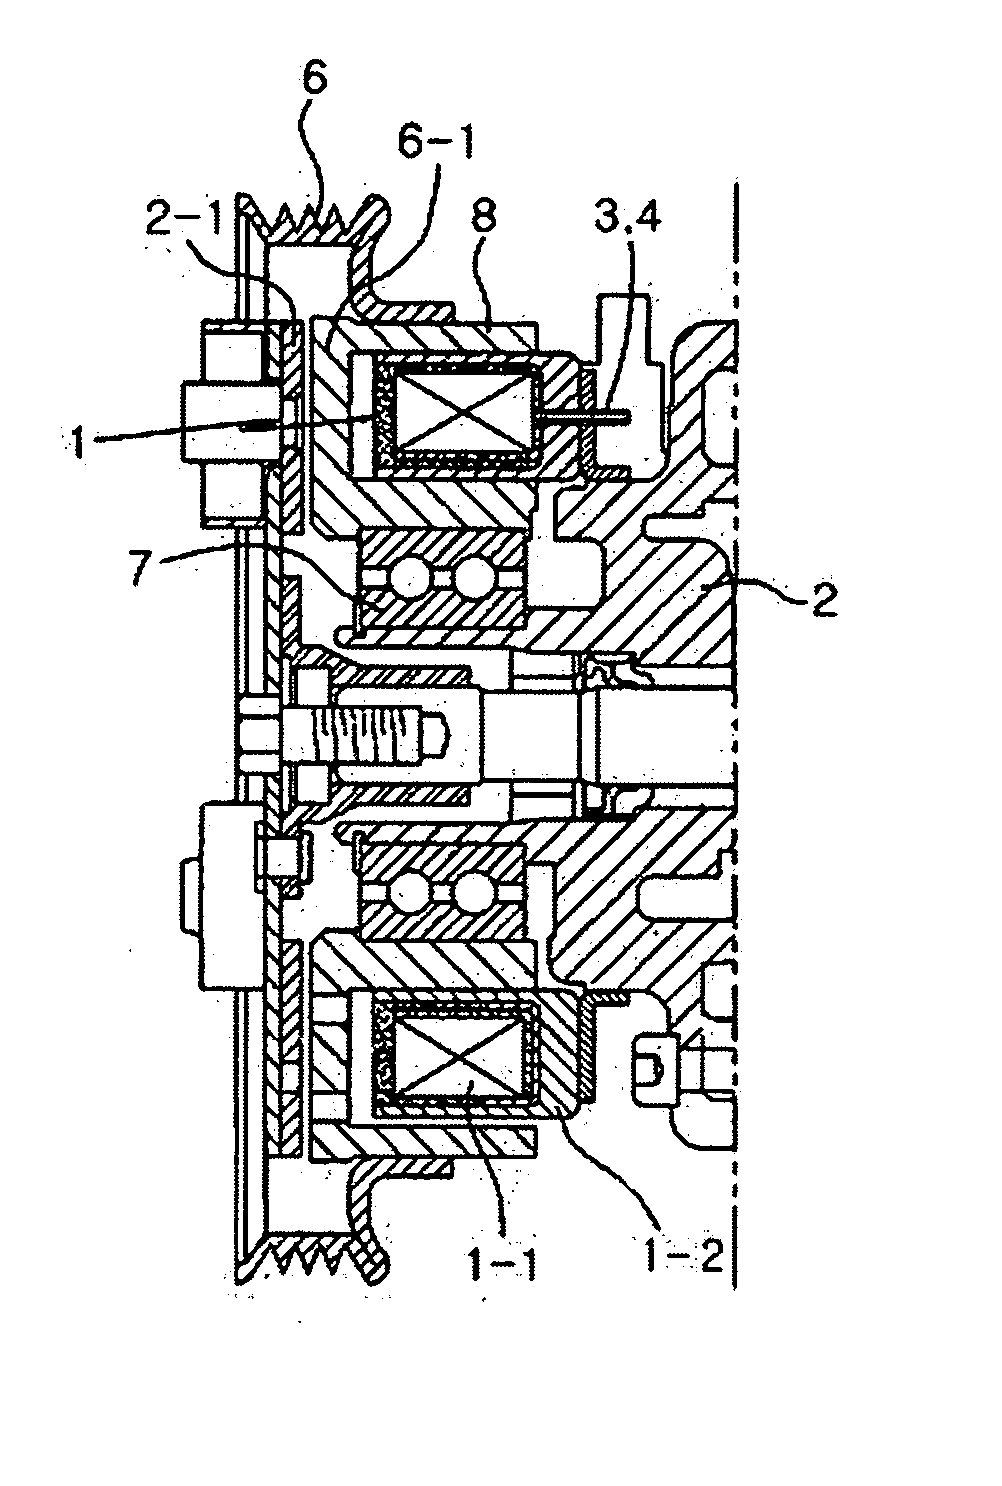 Electric power connection part of electromagnetic clutch field coil assembly